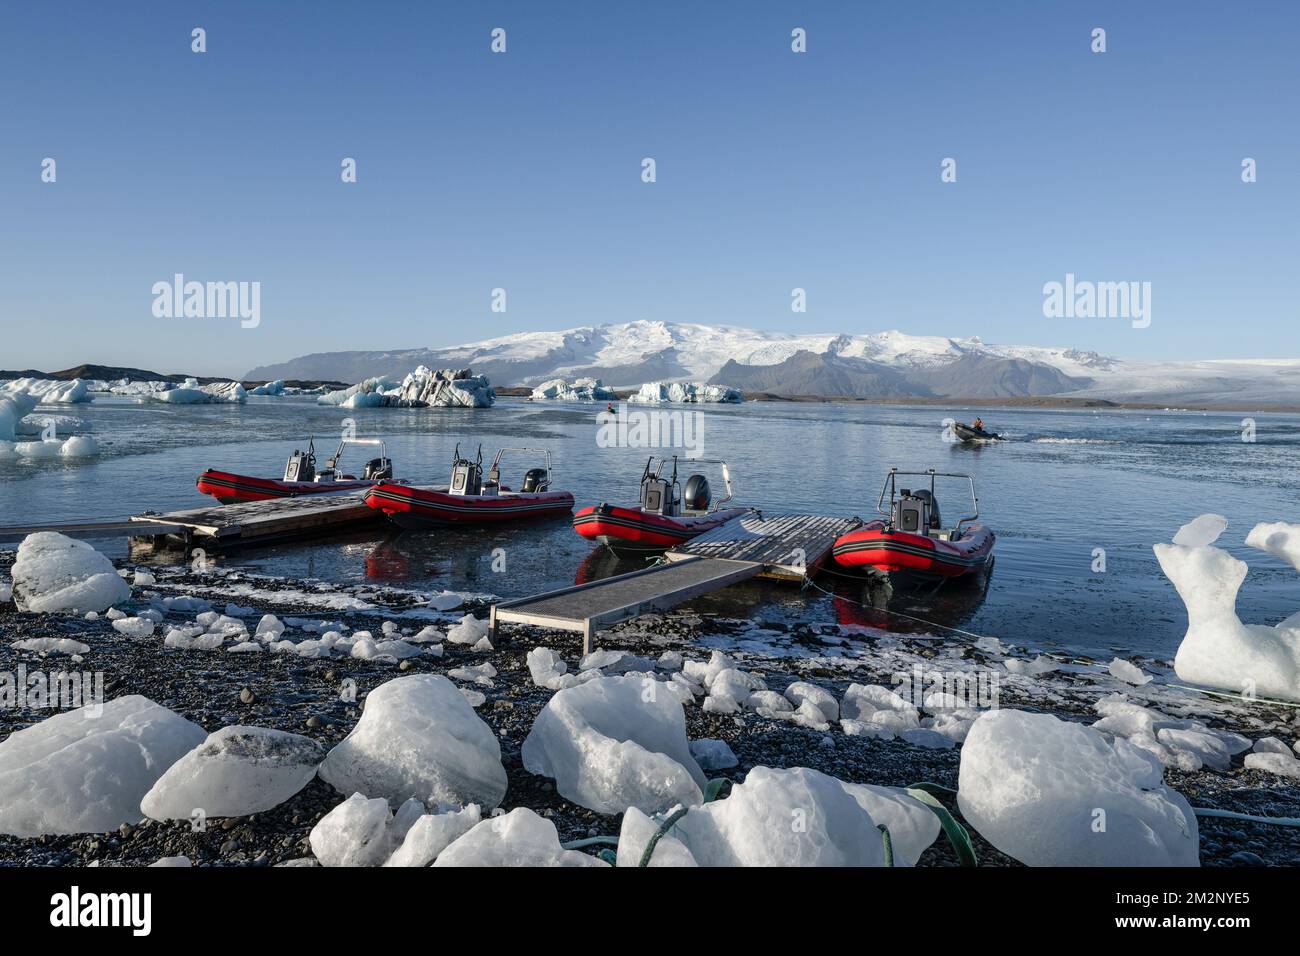 October 19, 2022, JÃ¶kulsÃrlÃ³n, JÃ¶kulsÃrlÃ³n, Iceland: General view of JÃ¶kulsÃrlÃ³n lake with boats, glaciers, and small ice formations. JÃ¶kulsÃrlÃ³n is a lake located in southern Iceland, with an area of 20 km2 and a depth of over 200 meters. Until less than 100 years ago, the BreiÃ°amerkurjÃ¶kull glacier (part of the VatnajÃ¶kull glacier) extended even beyond the ring road. Due to rising temperatures, the glacier has retreated, creating this impressive glacial lagoon. (Credit Image: © Jorge Castellanos/SOPA Images via ZUMA Press Wire) Stock Photo